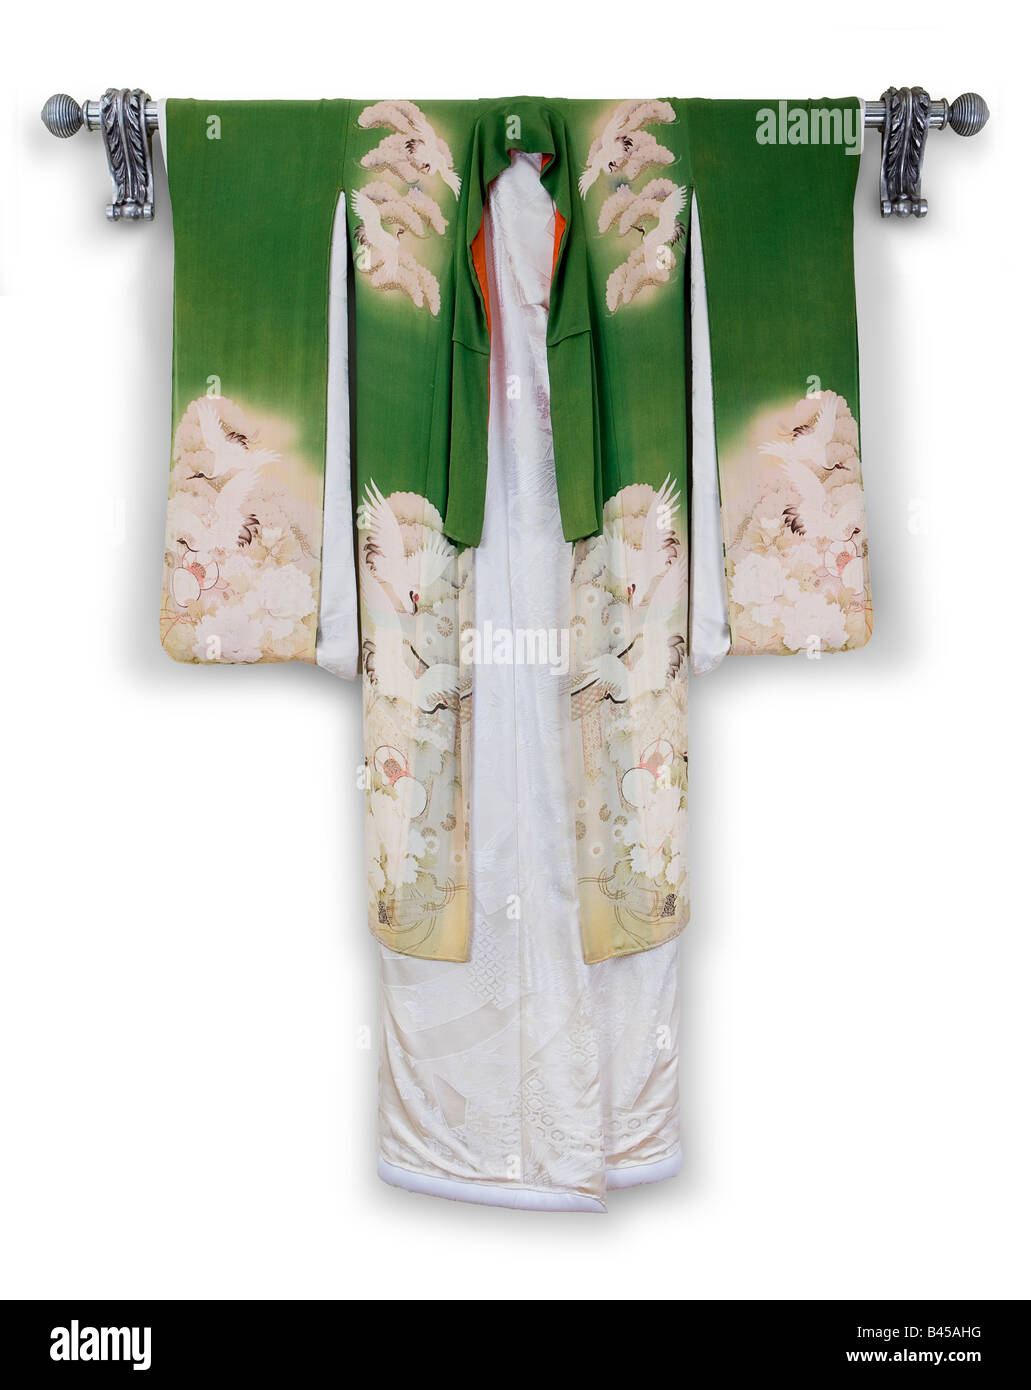 A green and white Japanese kimono with cranes embroidered on it. A clipping path is included. Stock Photo